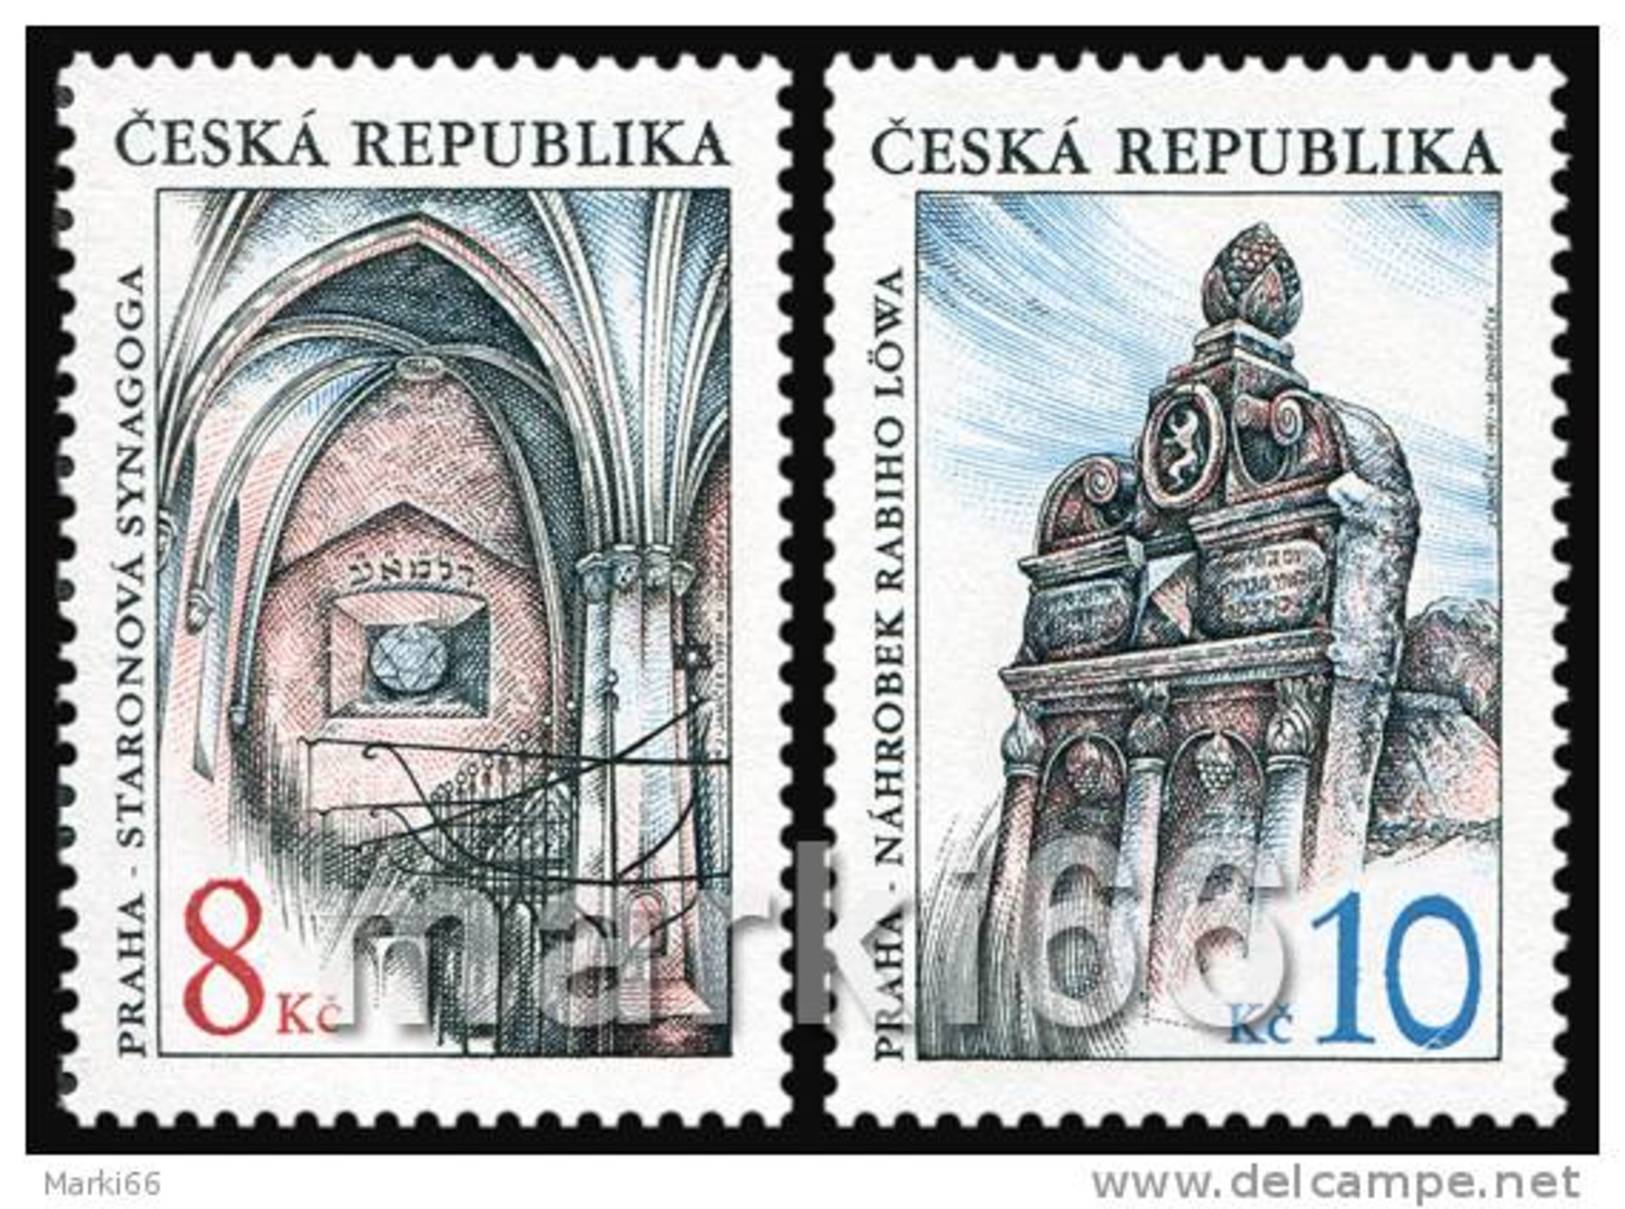 Czech Republic - 1997 - Beauties Of Our Country - Jewish Architectural Monuments - Mint Stamp Set - Unused Stamps